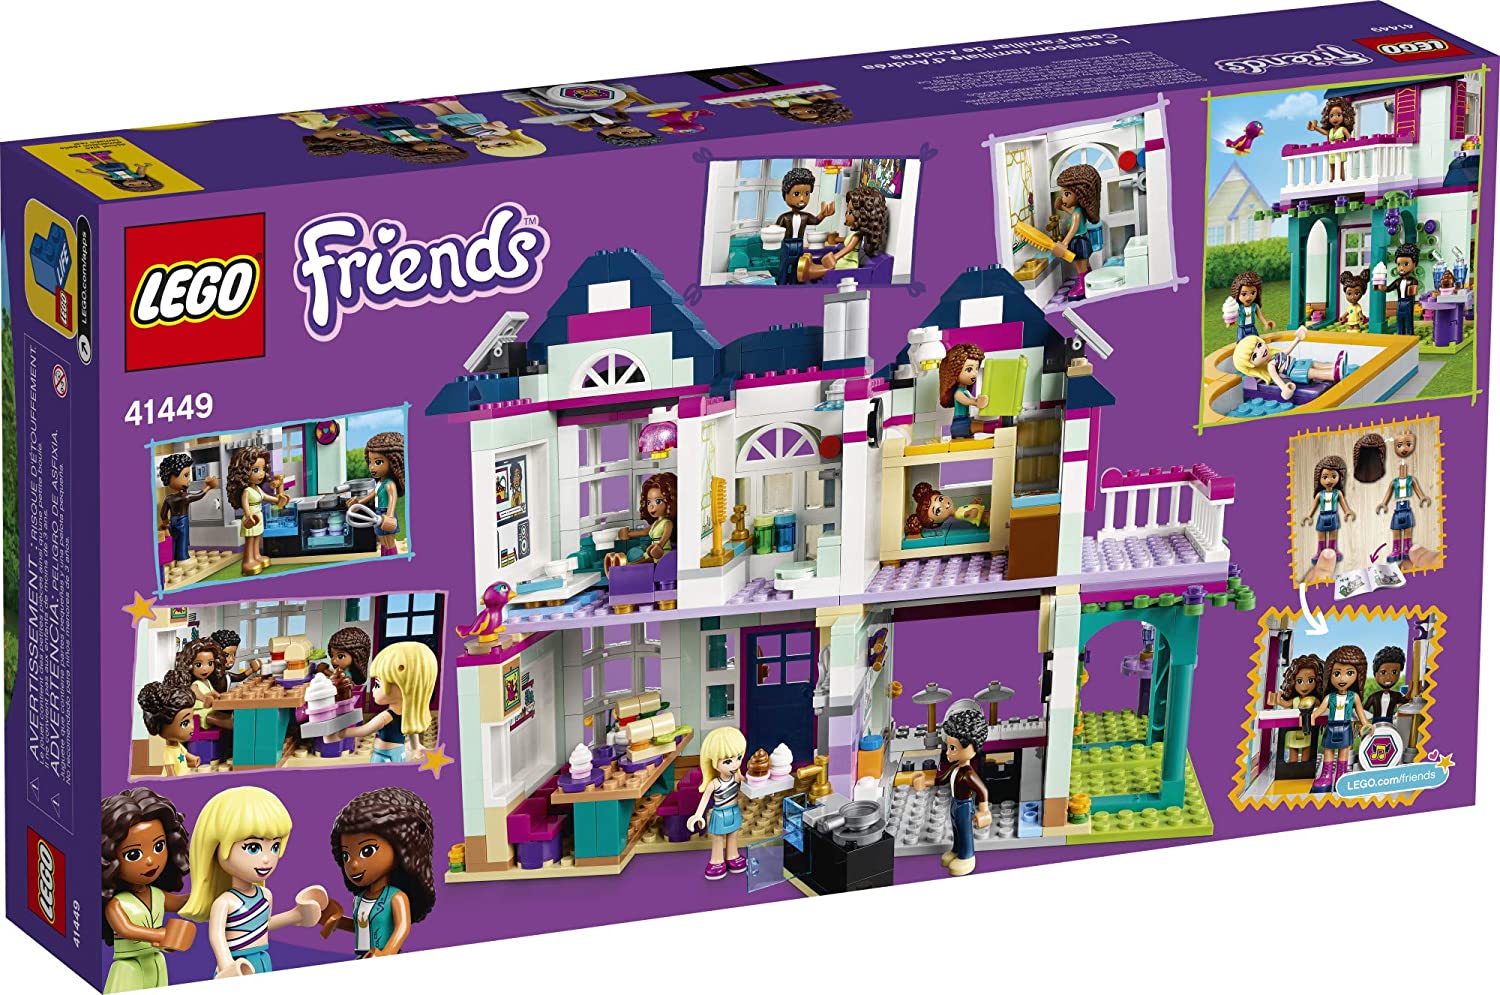 Lego Friends Andrea's Family House Building Kit, 802 Pieces - ANB Baby -block set